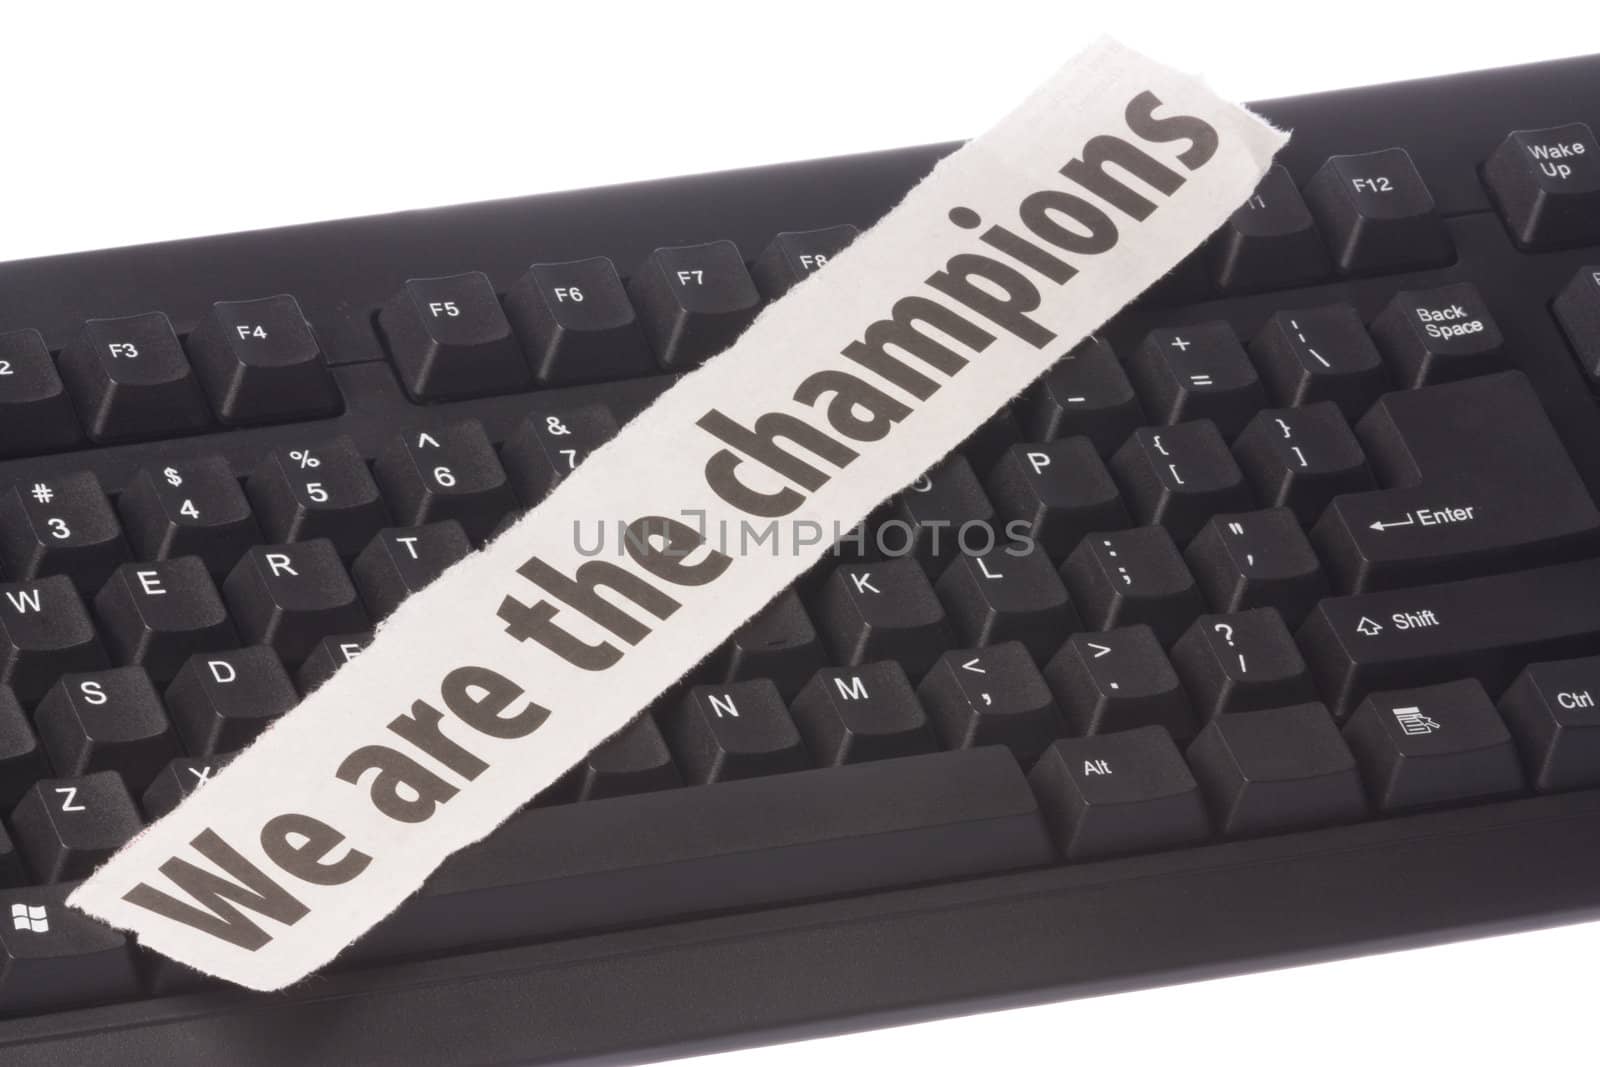 Image of a newspaper cutting with the words "We are the Champions" placed on a computer keyboard.